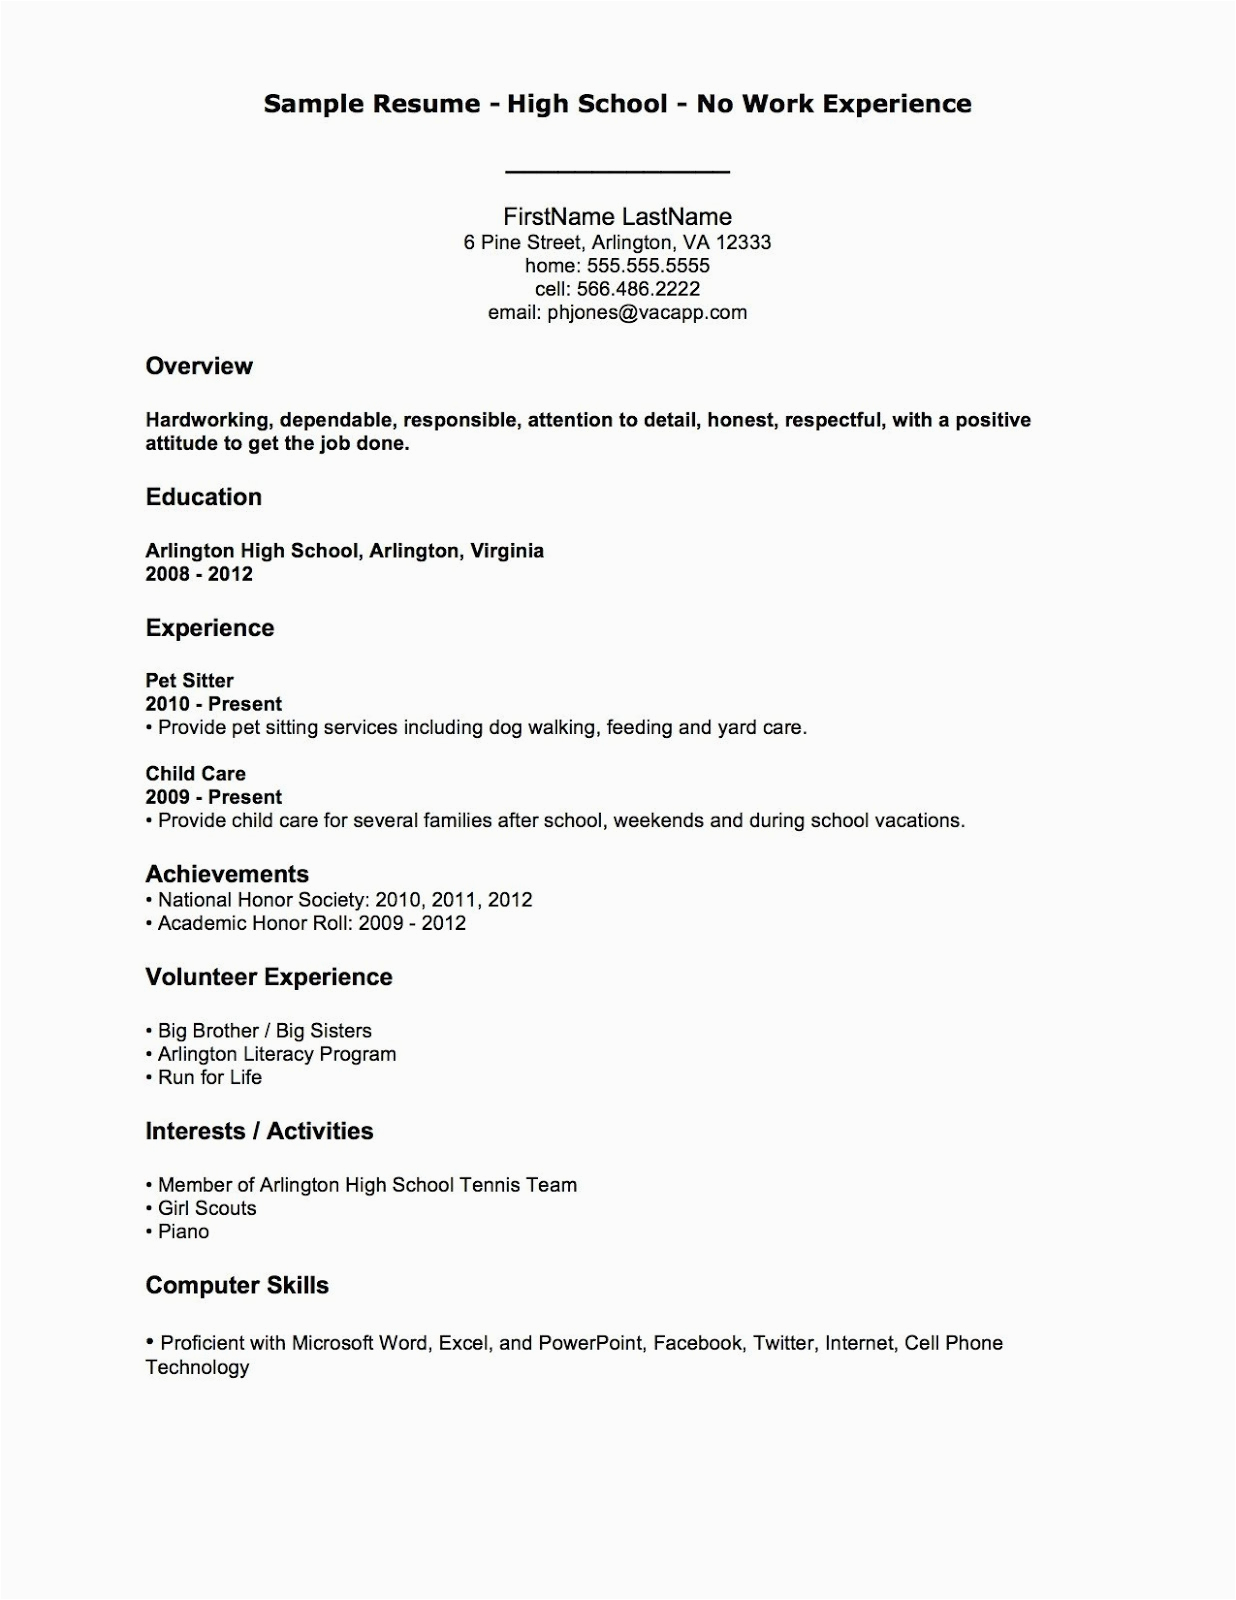 Resume for First Job No Experience Template First Job Sample Resume